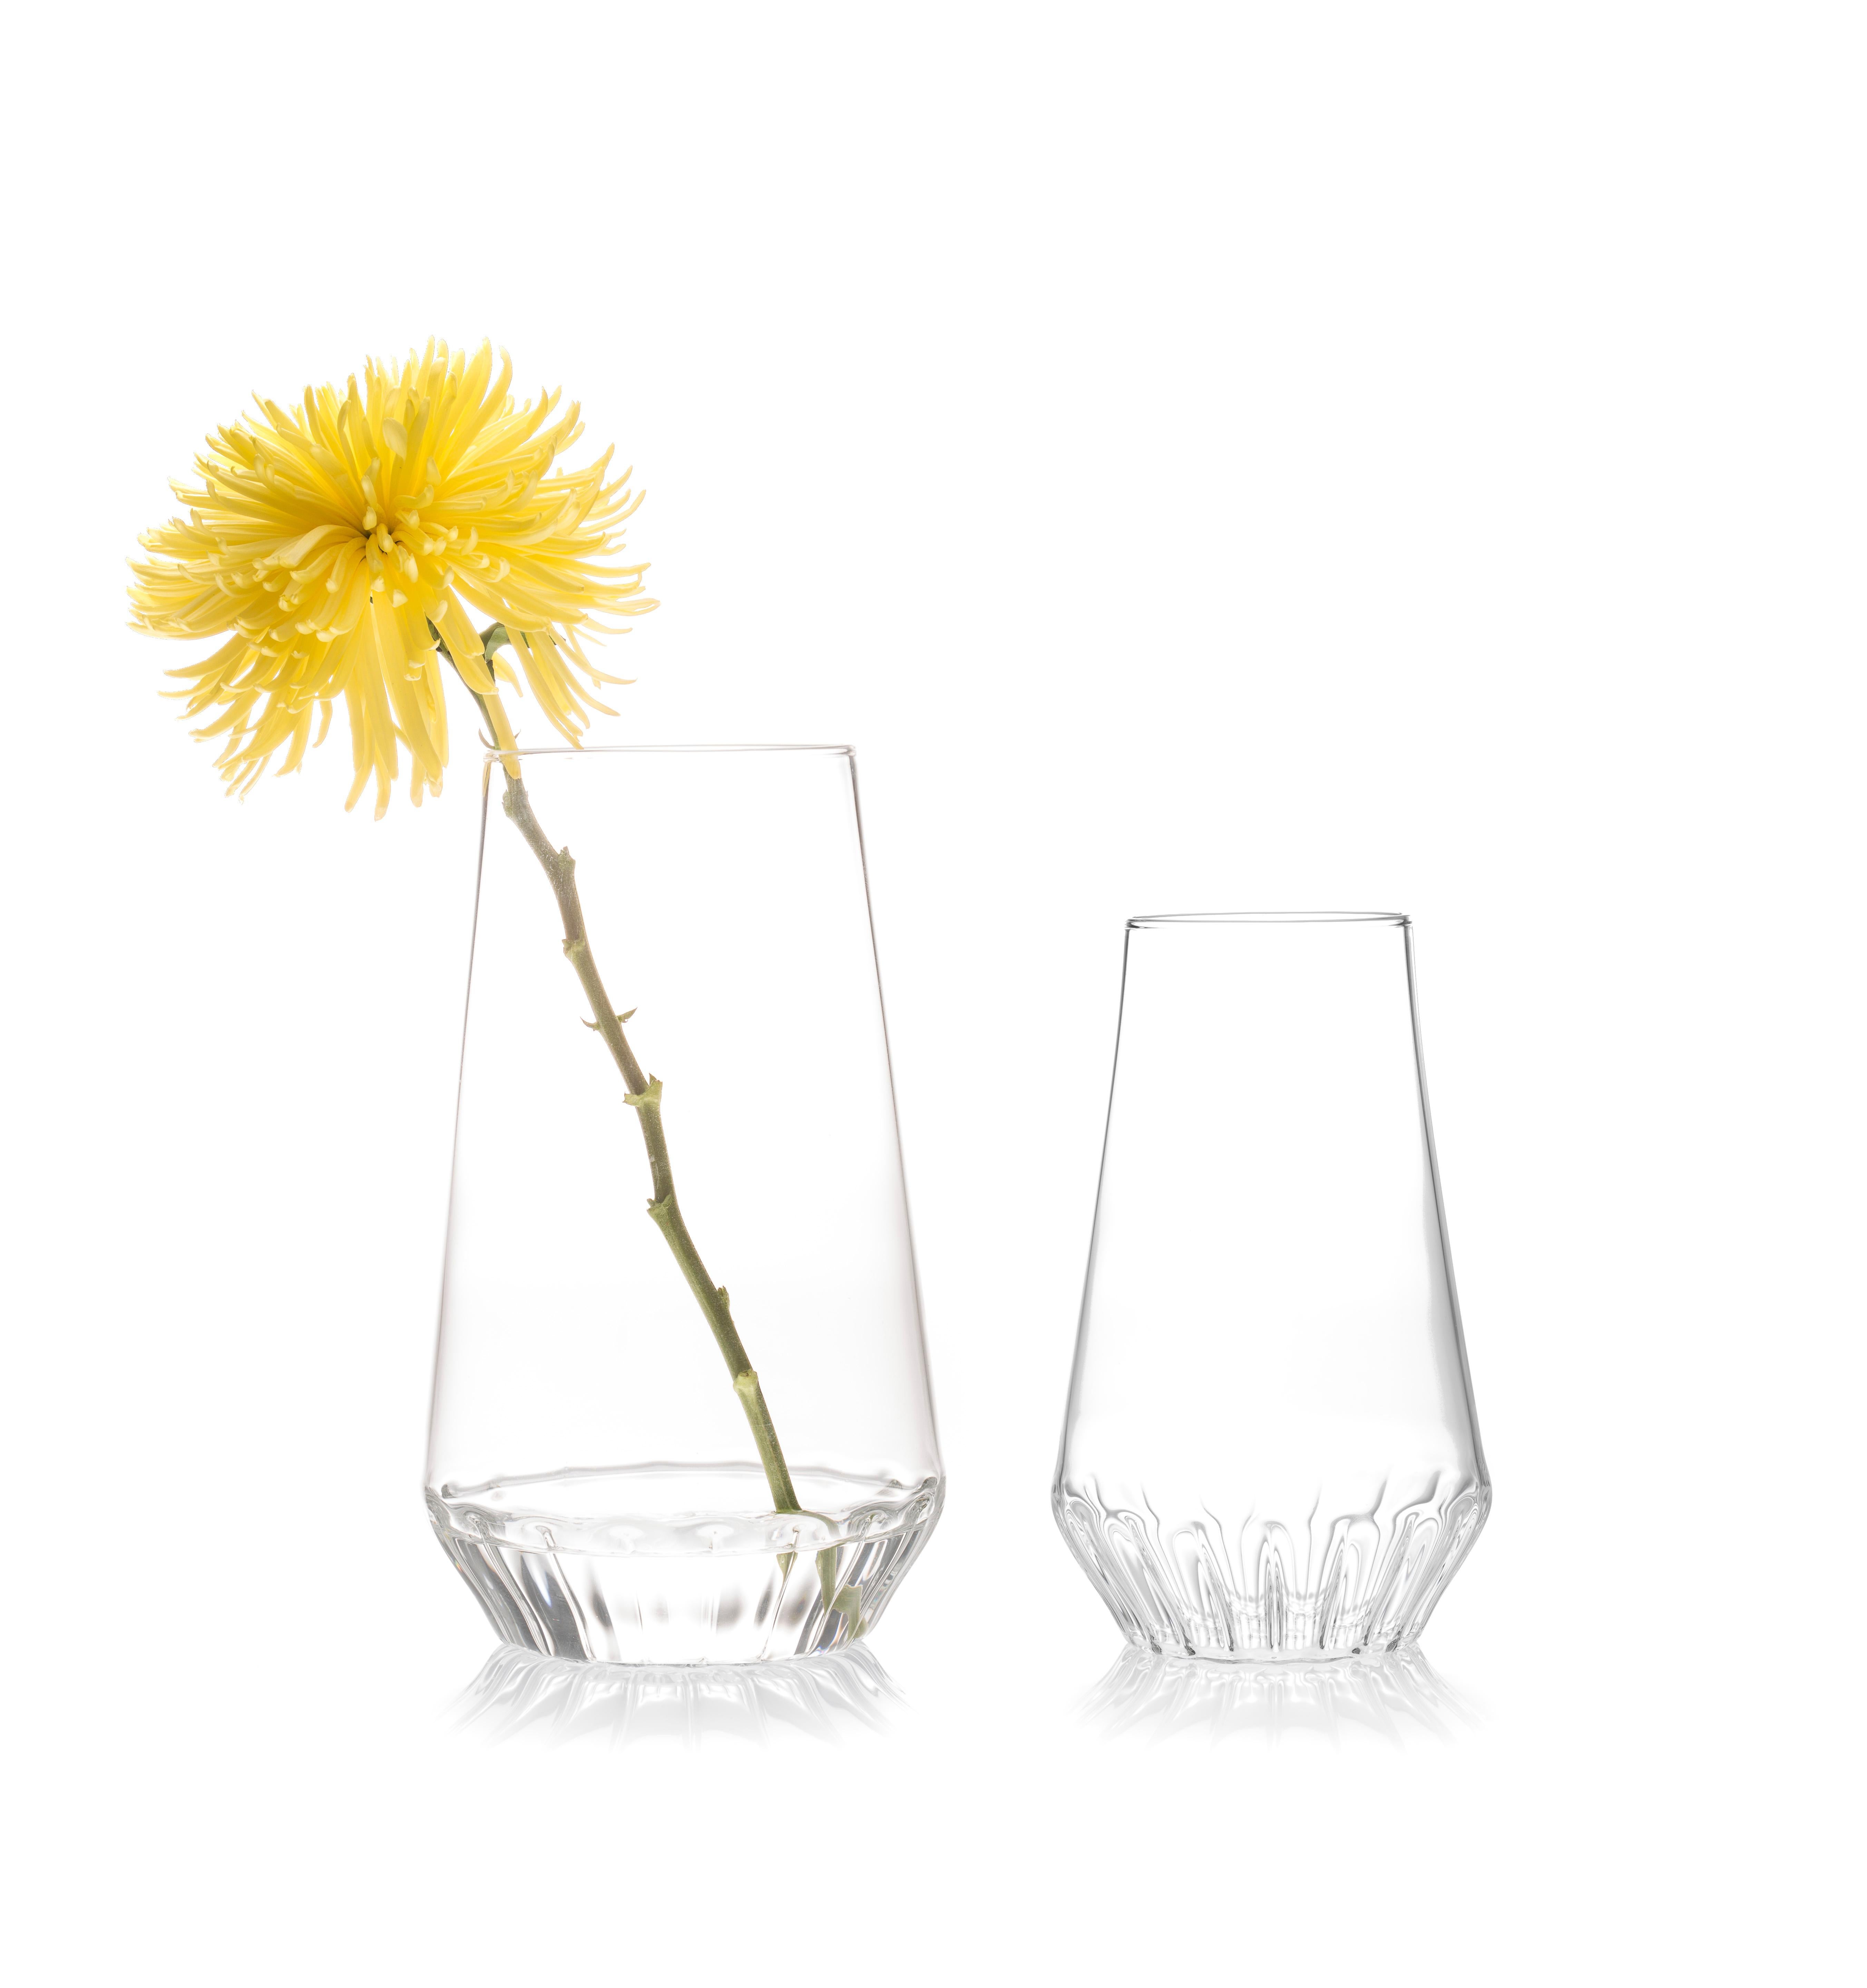 Rossi Vases Large & Medium - set of 2

From a single stem to a bouquet, the clear glass highlights the flower stem, celebrating it as an integral part of the arrangement. The lenticular effect of the fluted glass at the
bottom masks the ends of the